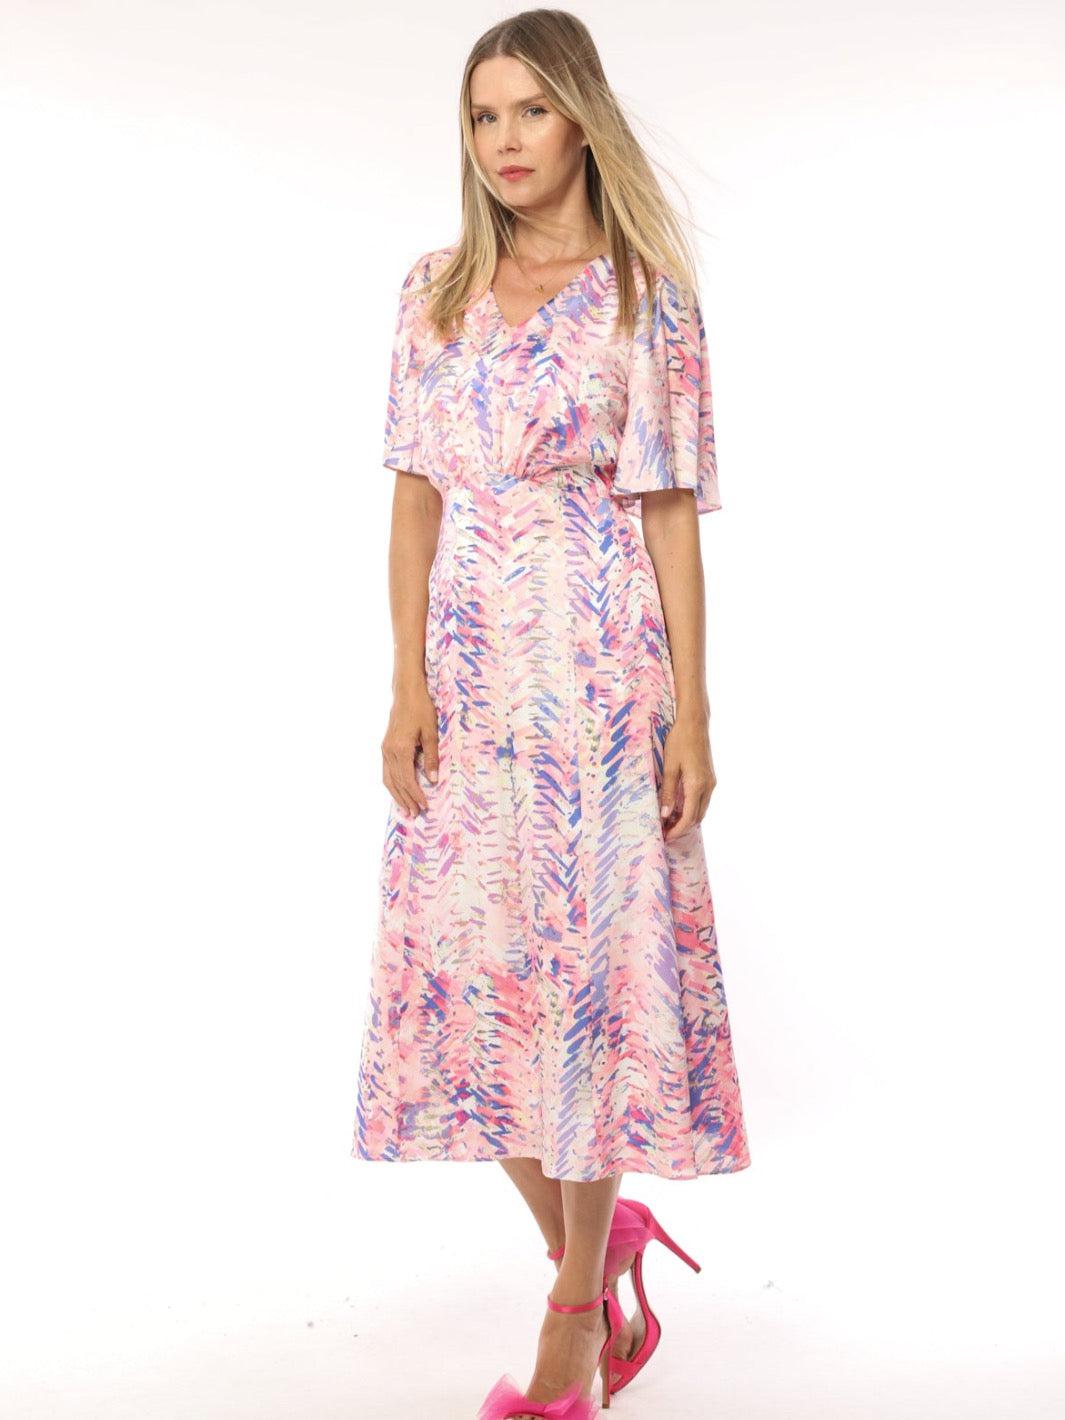 Lizabella Dress 2325-25 In Multi Print-Mother of the bride- mother of the groom -Nicola Ross